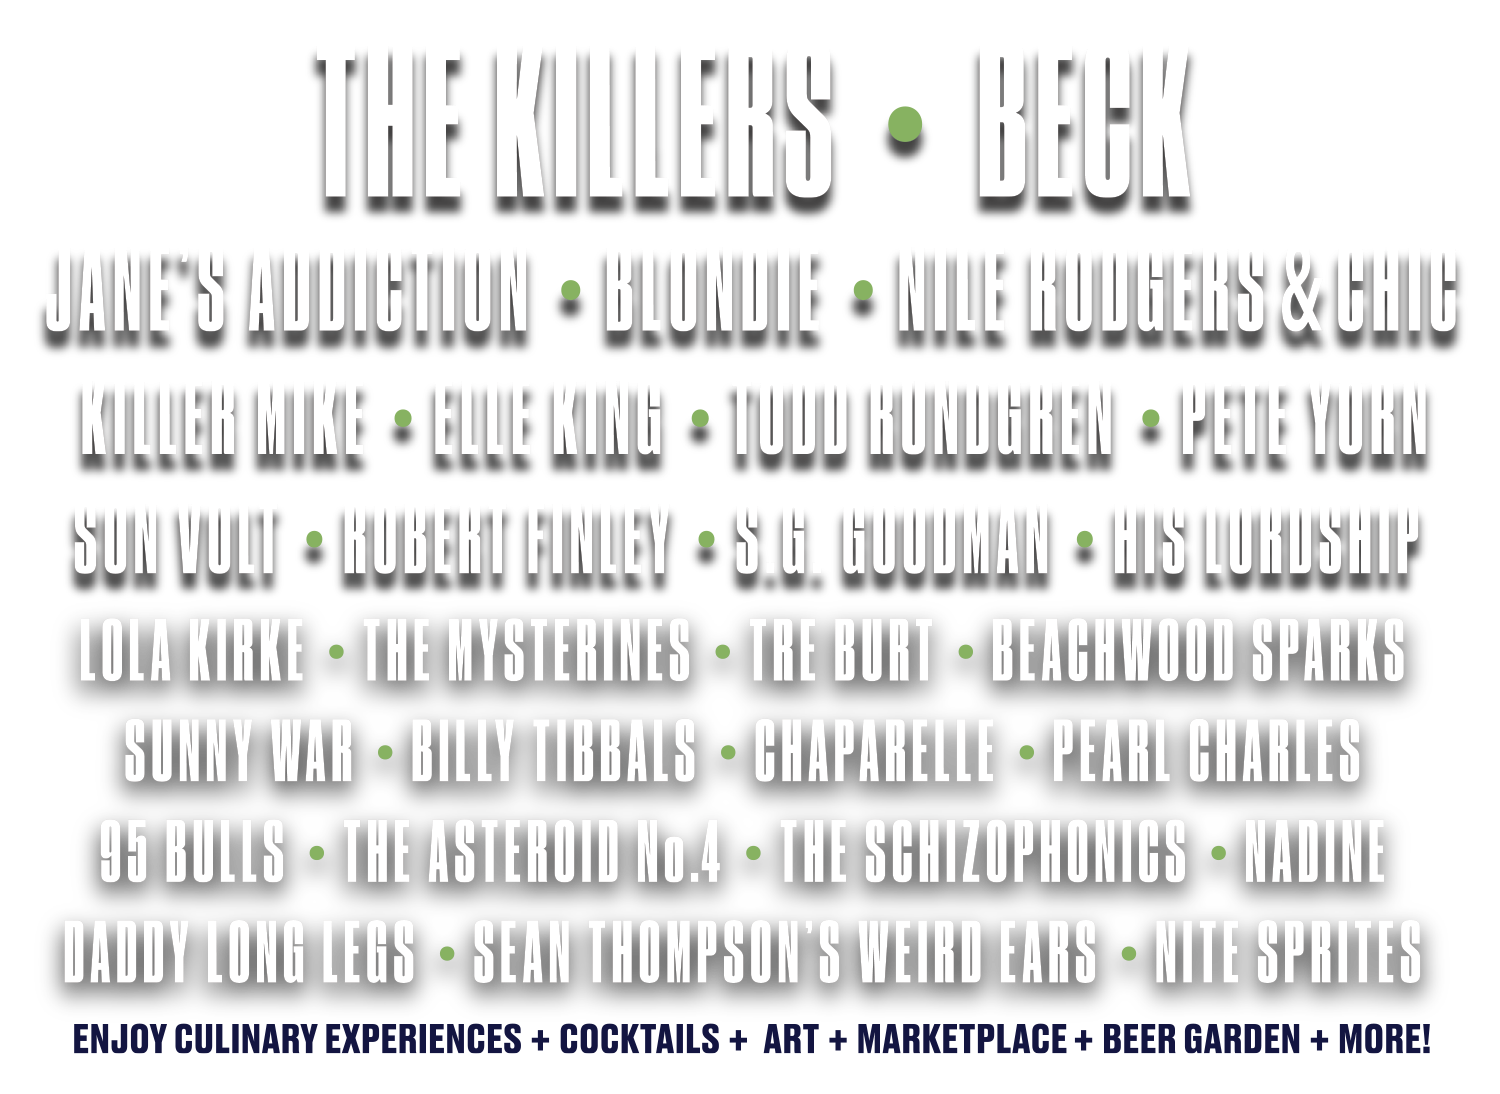 Lineup featuring, The Killers, Beck, Jane's Addiction, Blondie, Nile Rodgers + Chic, Killer Mike, Elle King, Todd Rundgren, Pete Yorn, Son Volt, Robert Finley, S.g. Goodman, His Lordship, Lola Kirke, The Mysterines, Tre Burt, Beachwood Sparks, Sunny War, Billy Tibbals Band, Chaparelle, Pearl Charles, 95 Bulls, The Asteroid No 4, The Schizophonics, Nadine, Daddy Long Legs, Sean Thompsons Weird Ears, and Nite Sprites. Plus Enjoy Culinary Experiences, Cocktails, Art, Marketplace, Beer Garden and More.